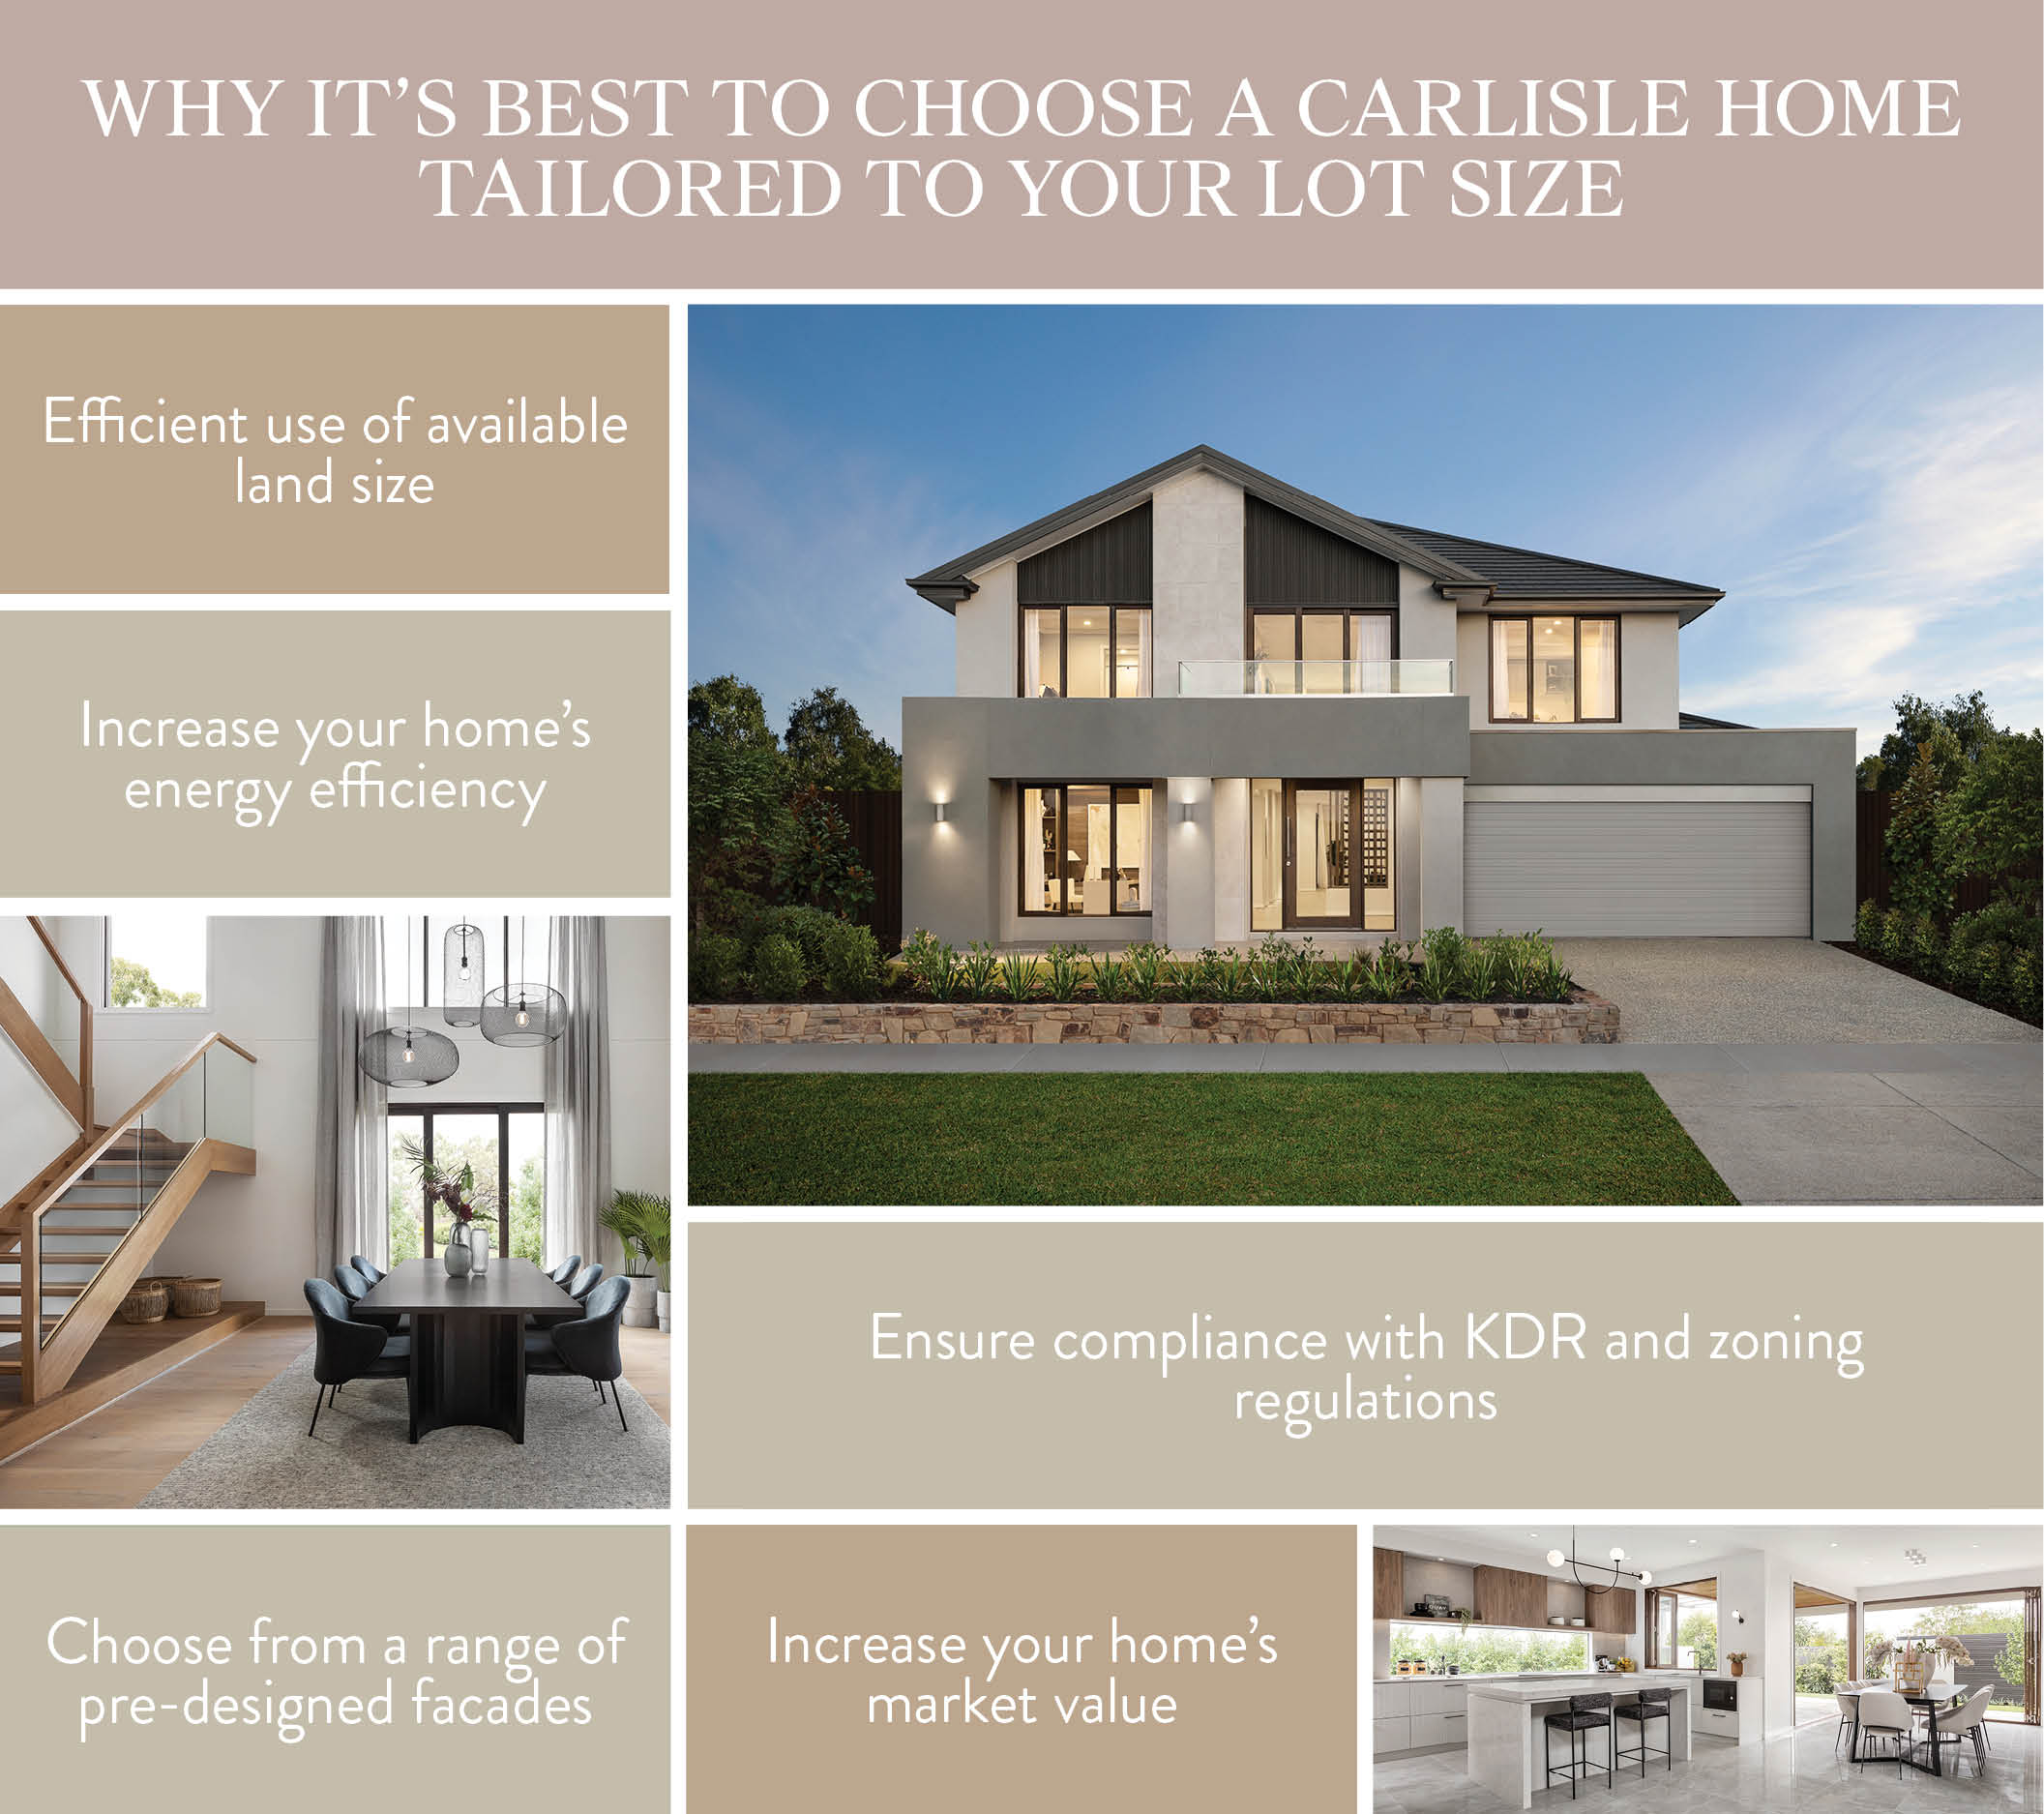 CHB455 6 of Our Best-Loved Homes Now Optimised for 50-Foot Lots - BODY.jpg